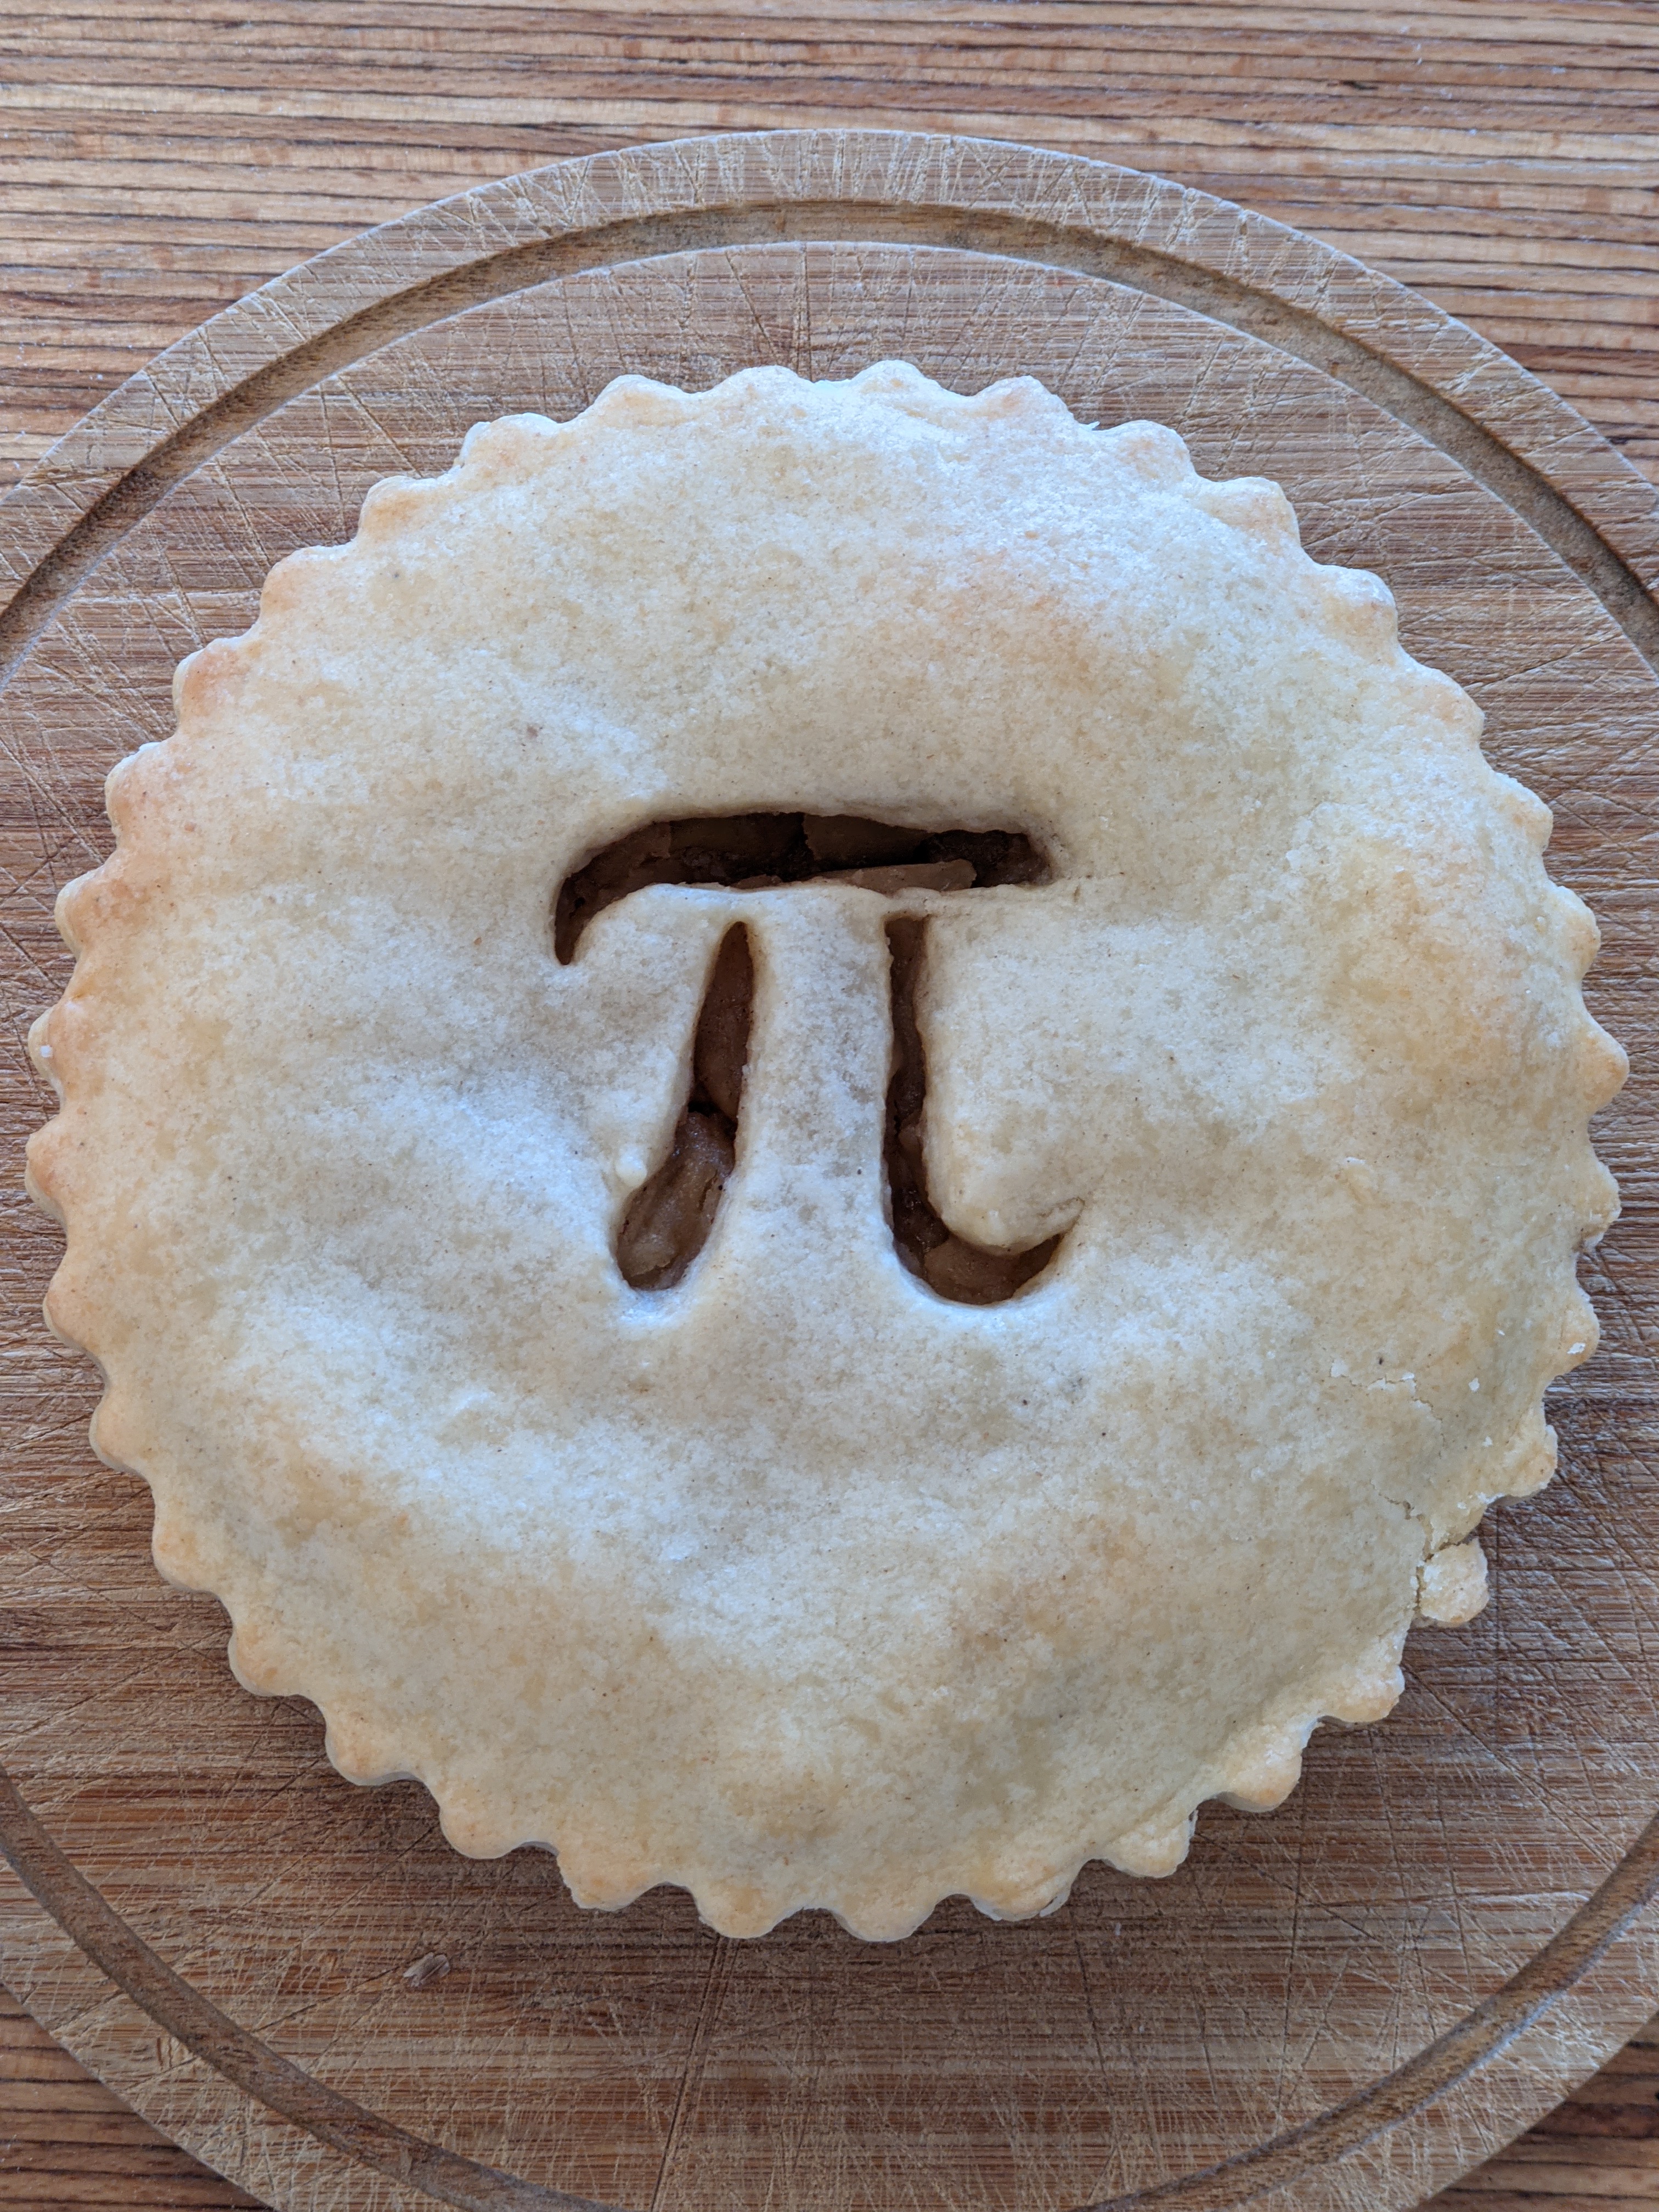 A photo of a pie on a wooden plate with the symbol for Pi in the center of the crust.